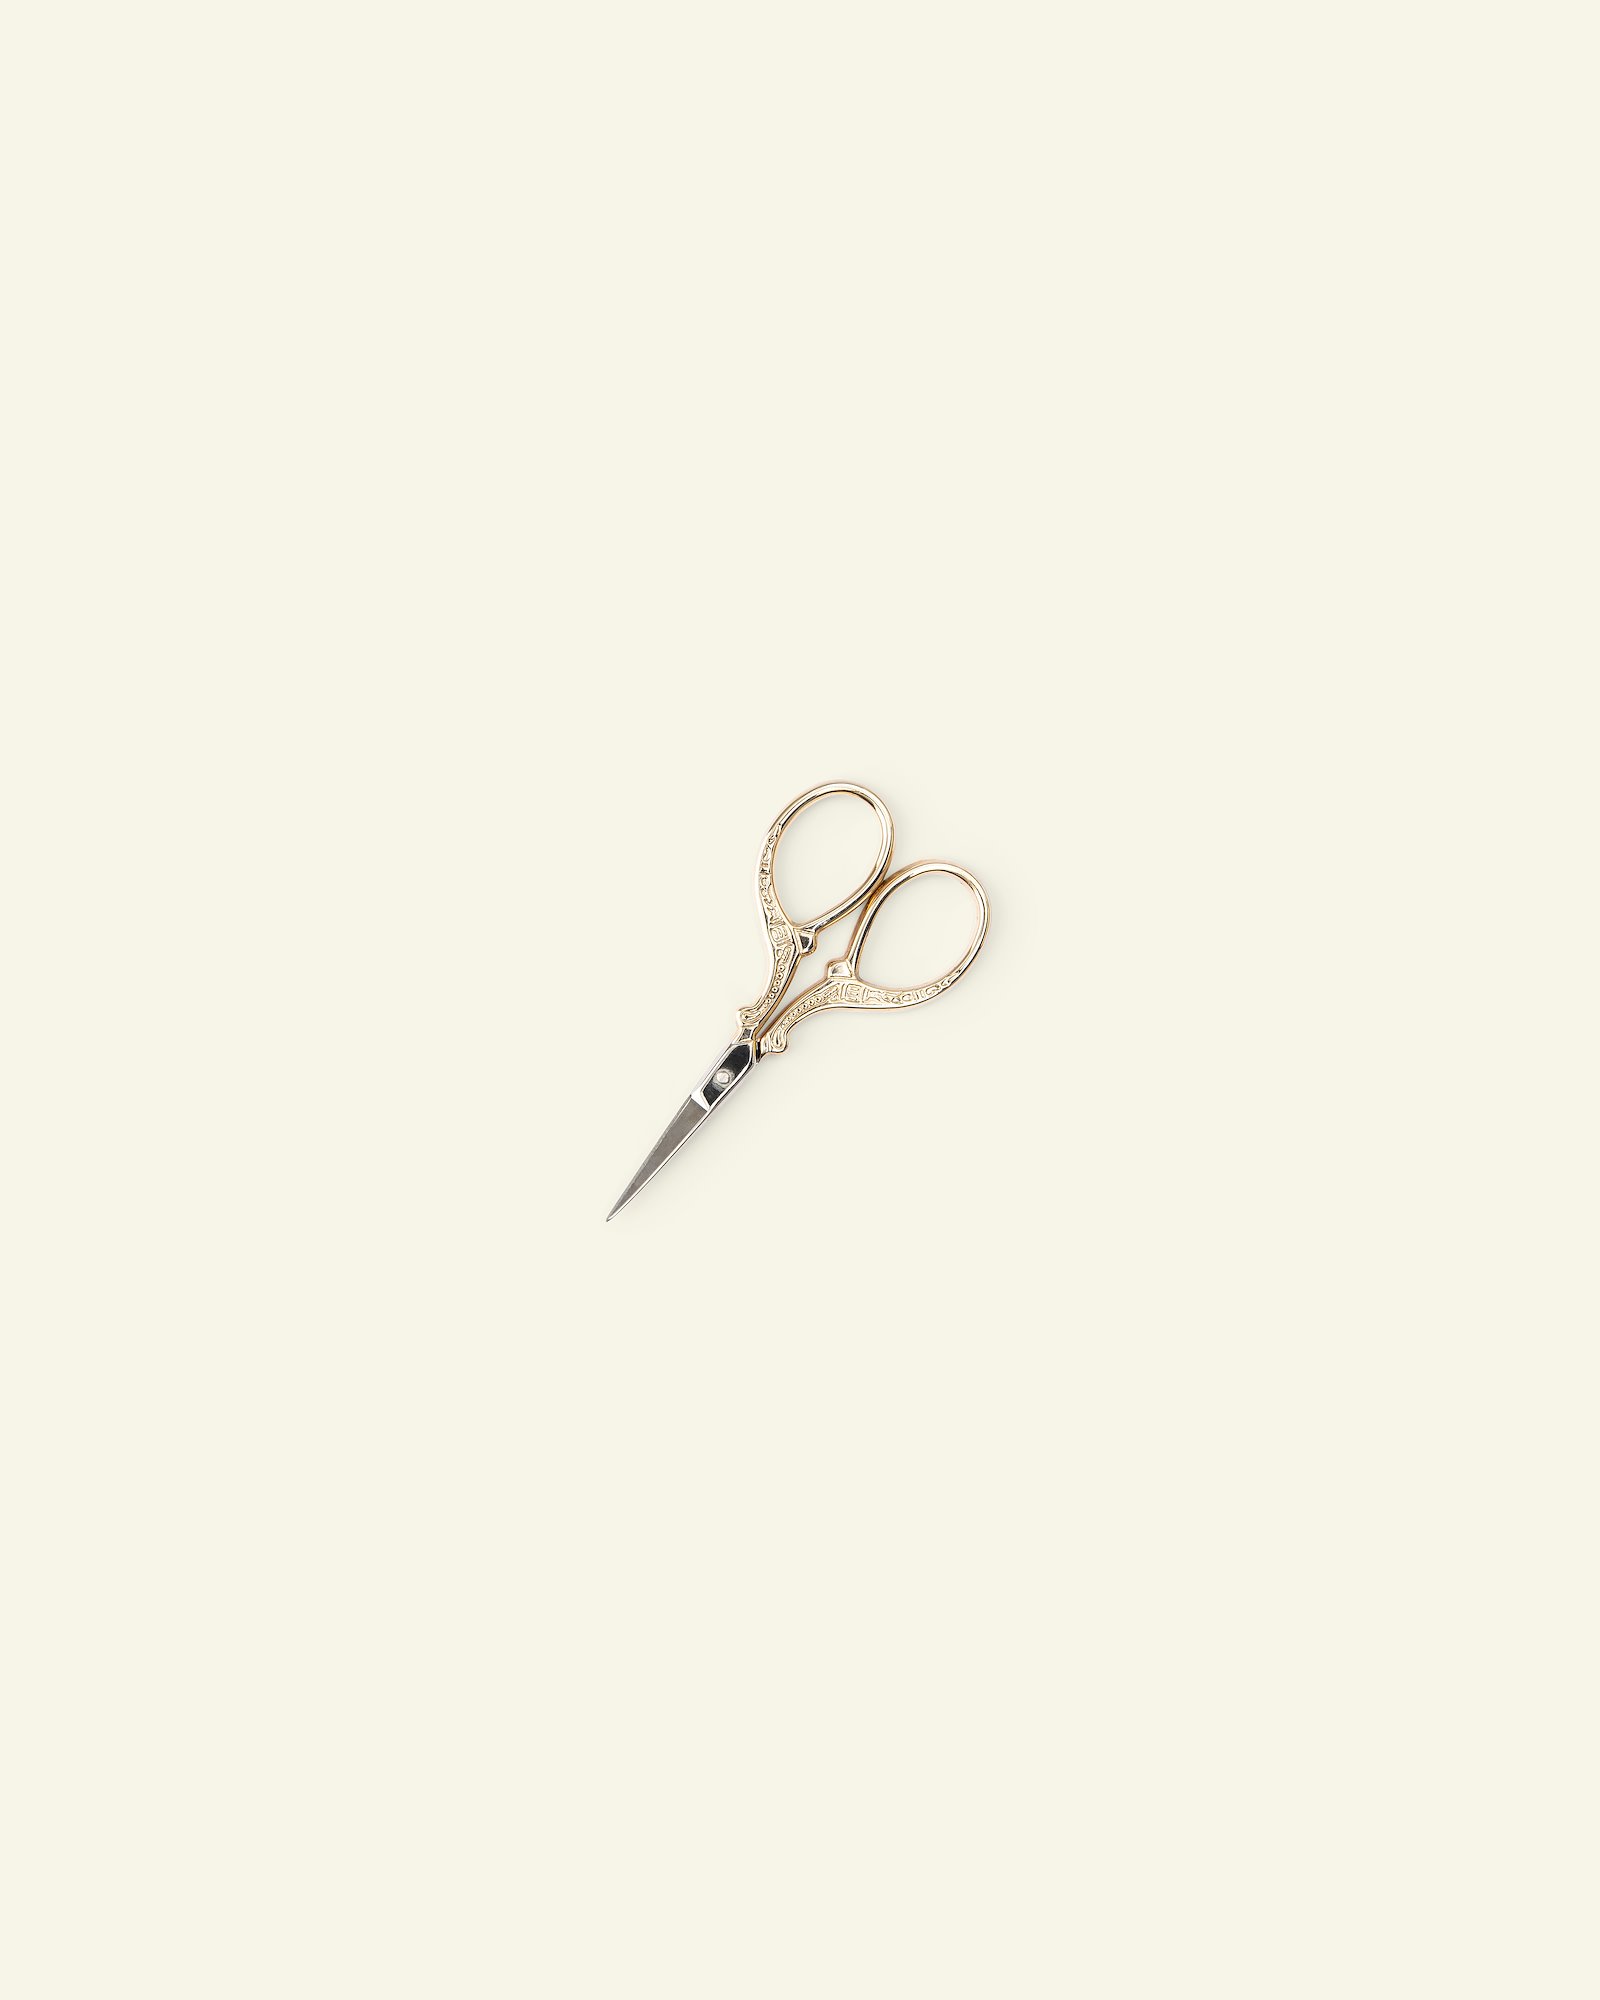 Embroidery scissor 9cm gold 1pc 42029_pack